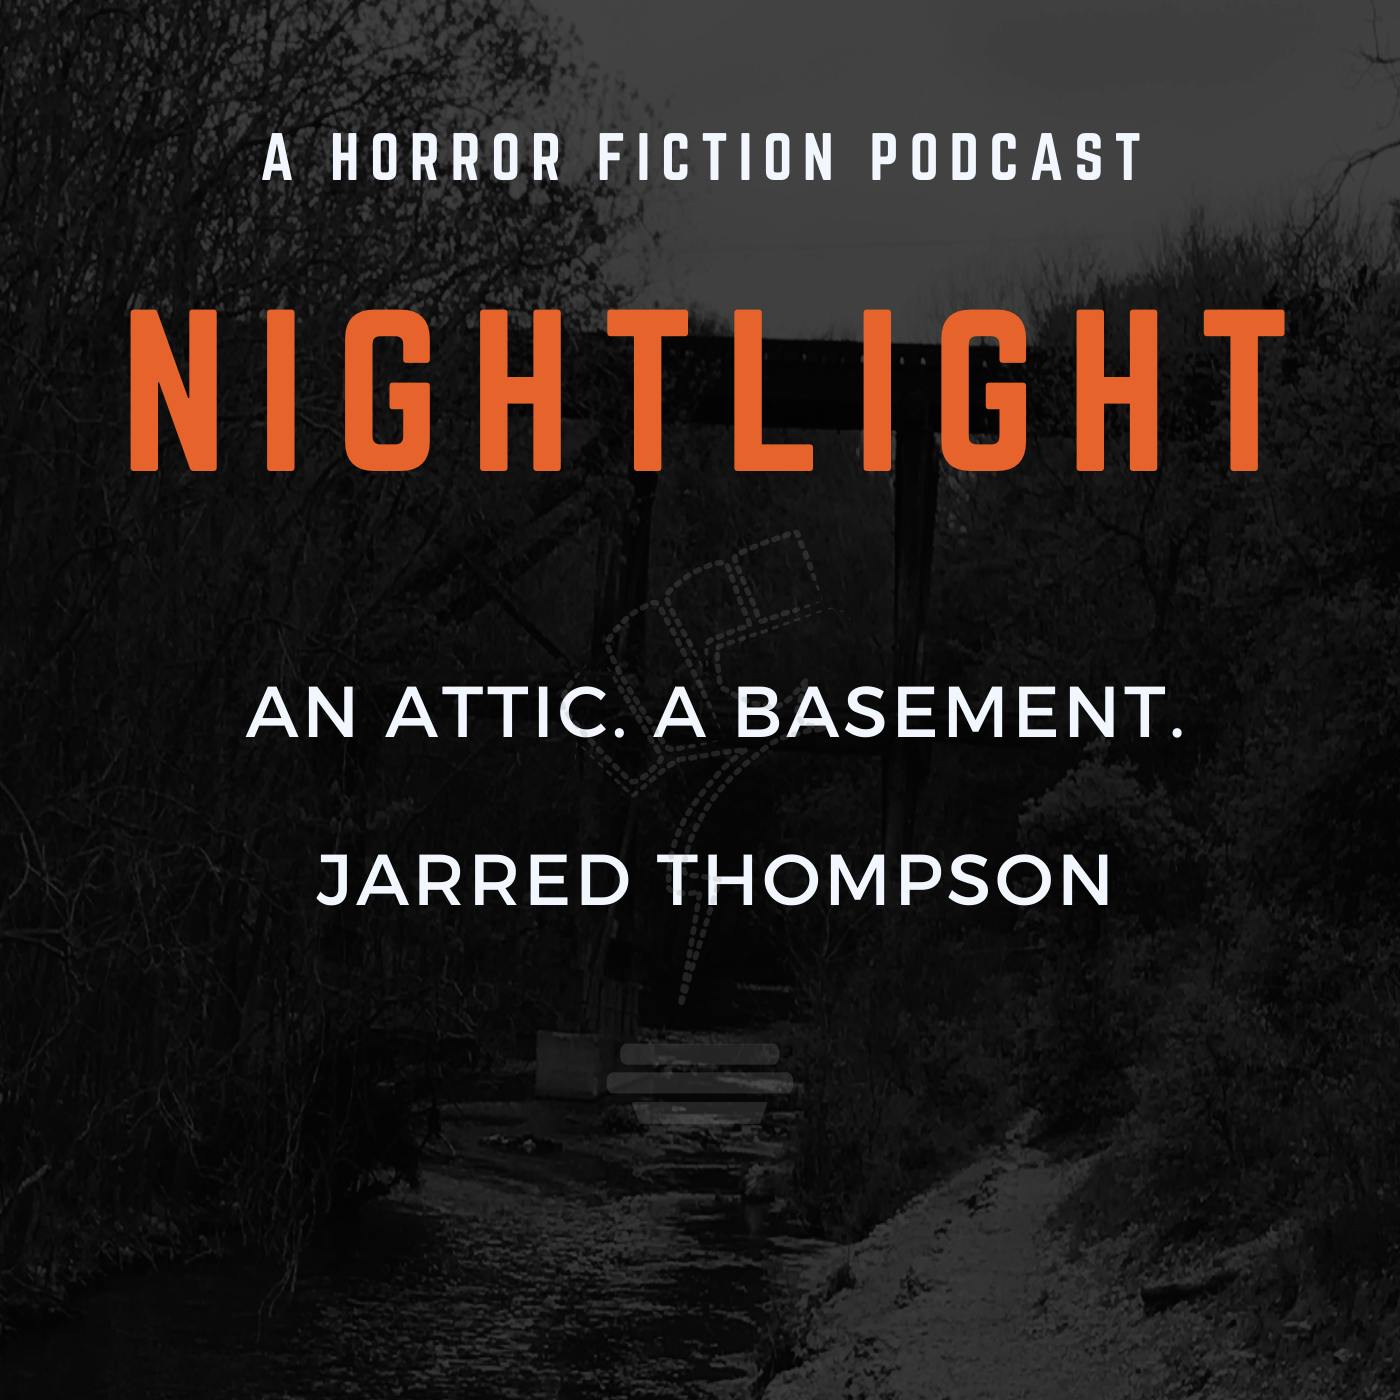 625: An Attic. A Basement. by Jarred Thompson